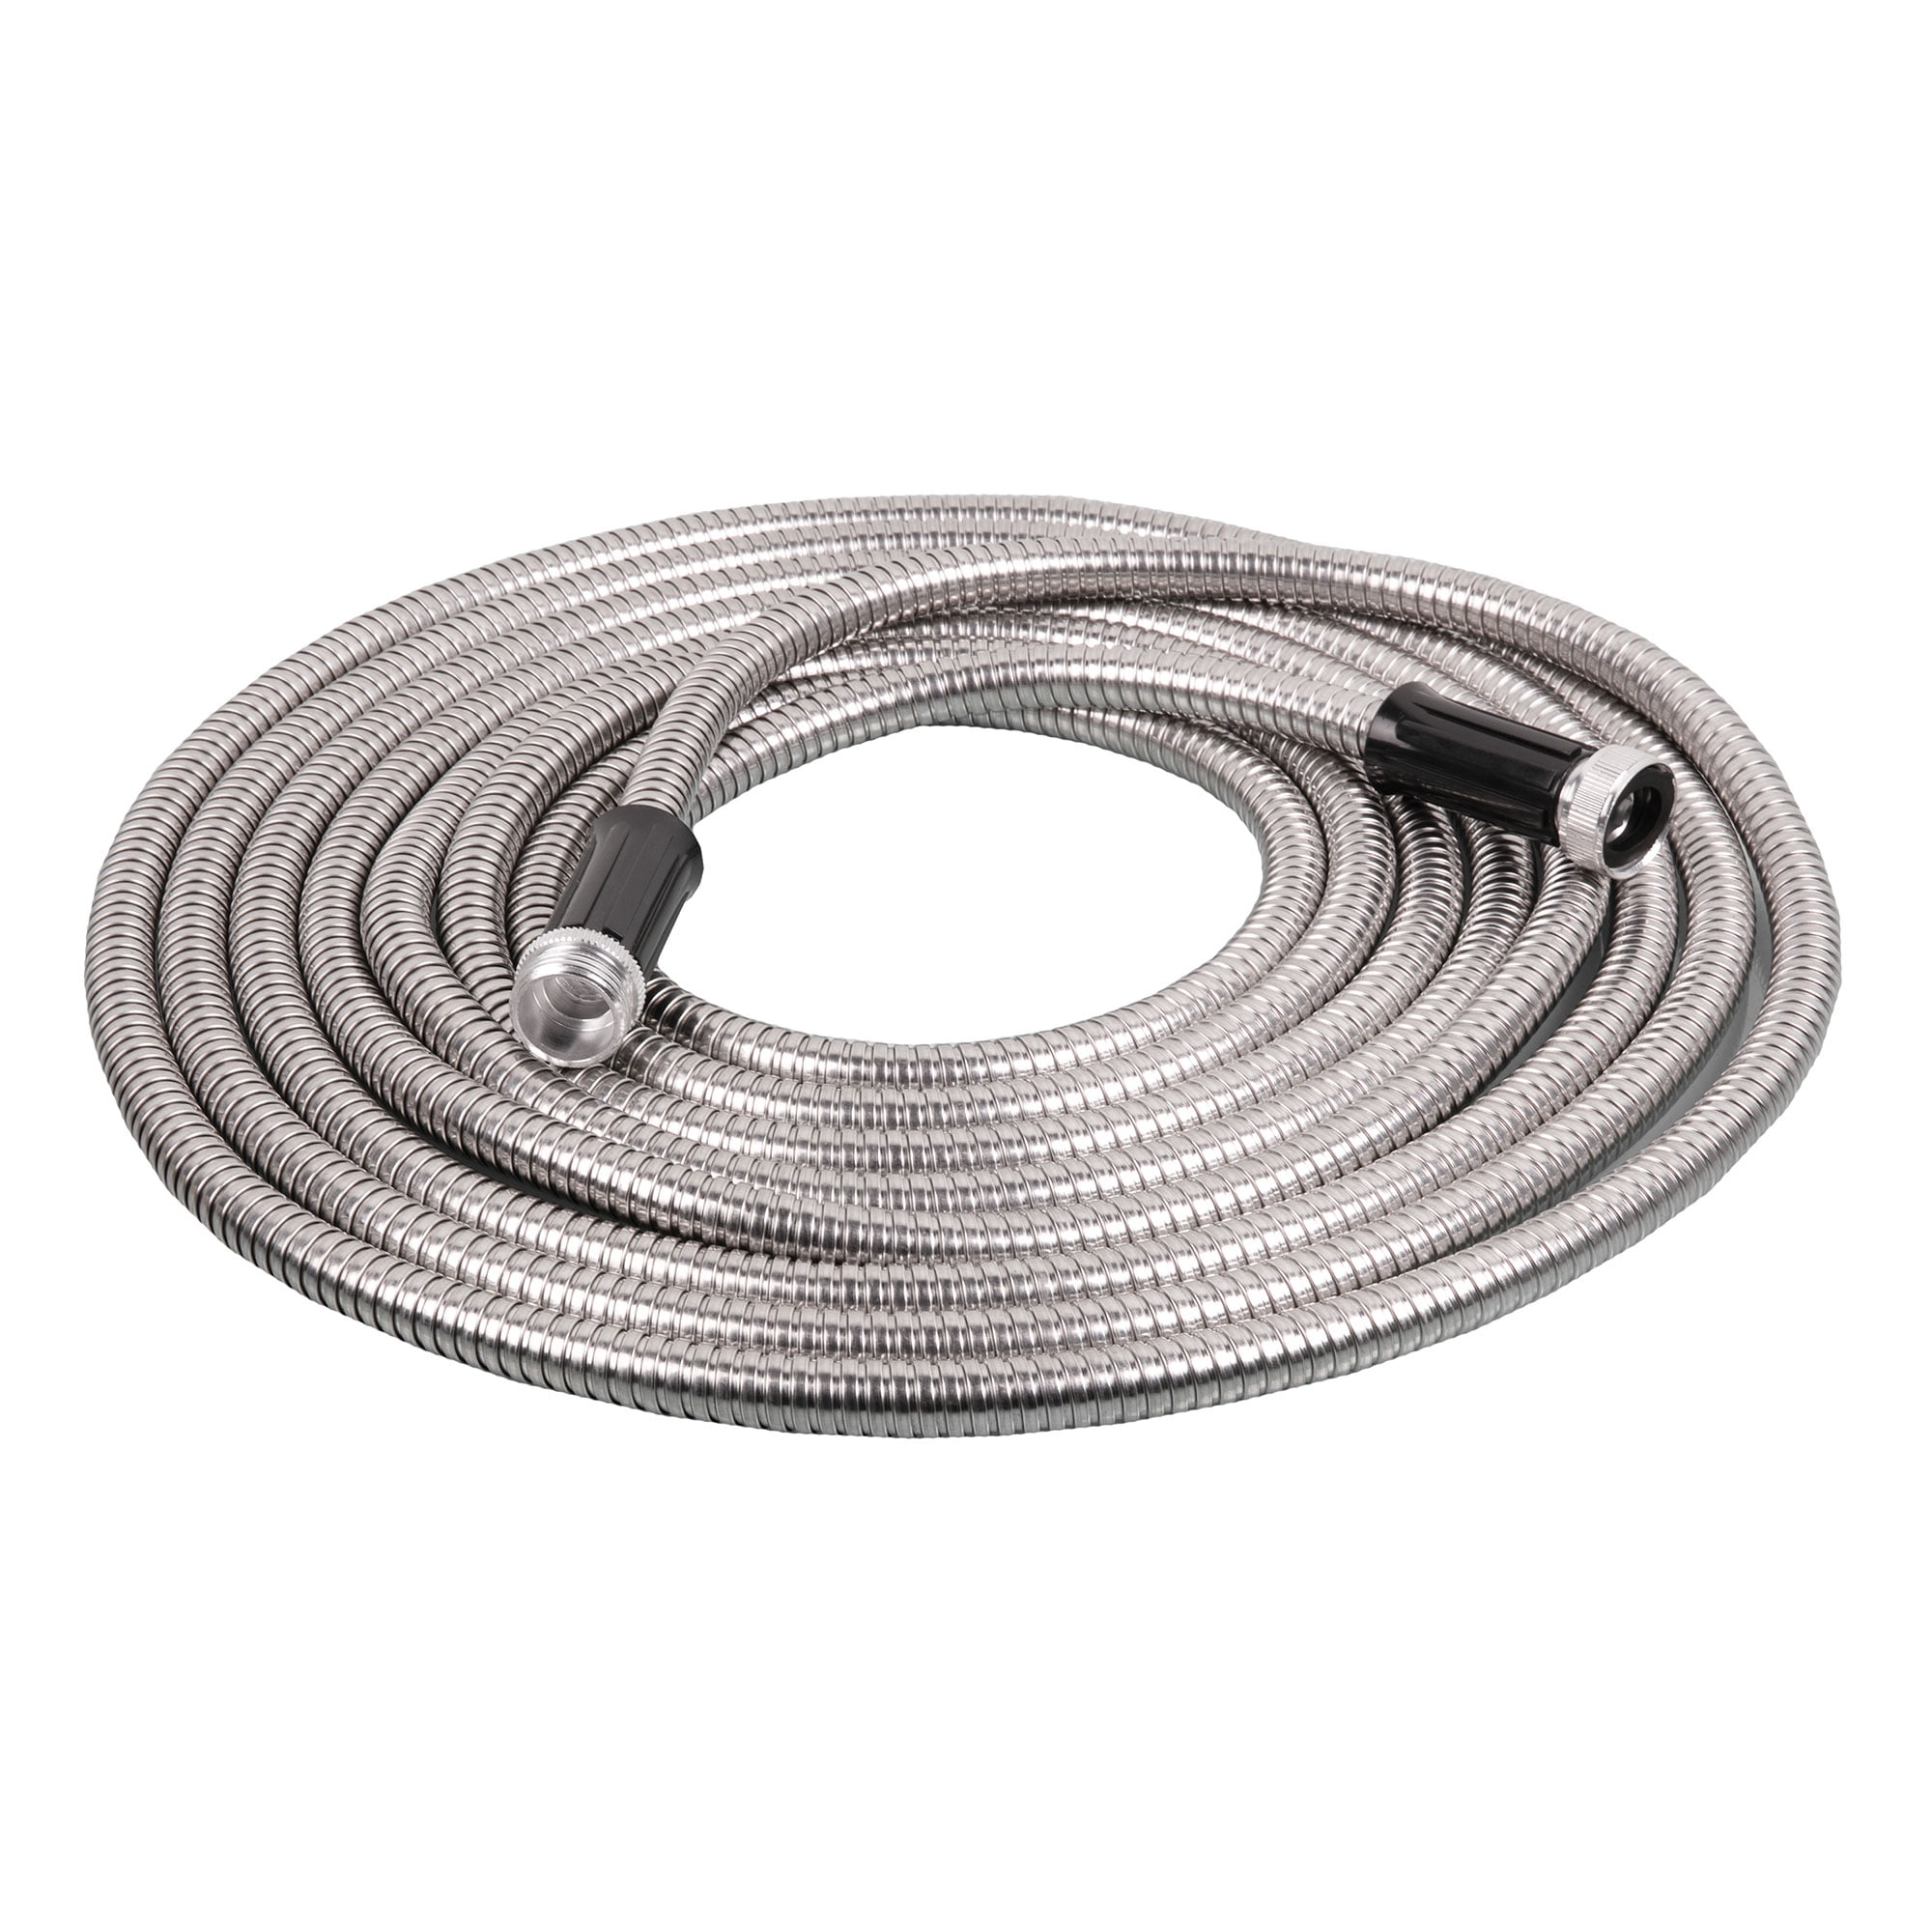 Stainless Steel Garden Hose Lightweight Metal Hose with Free Nozzle 25Ft-100Ft 